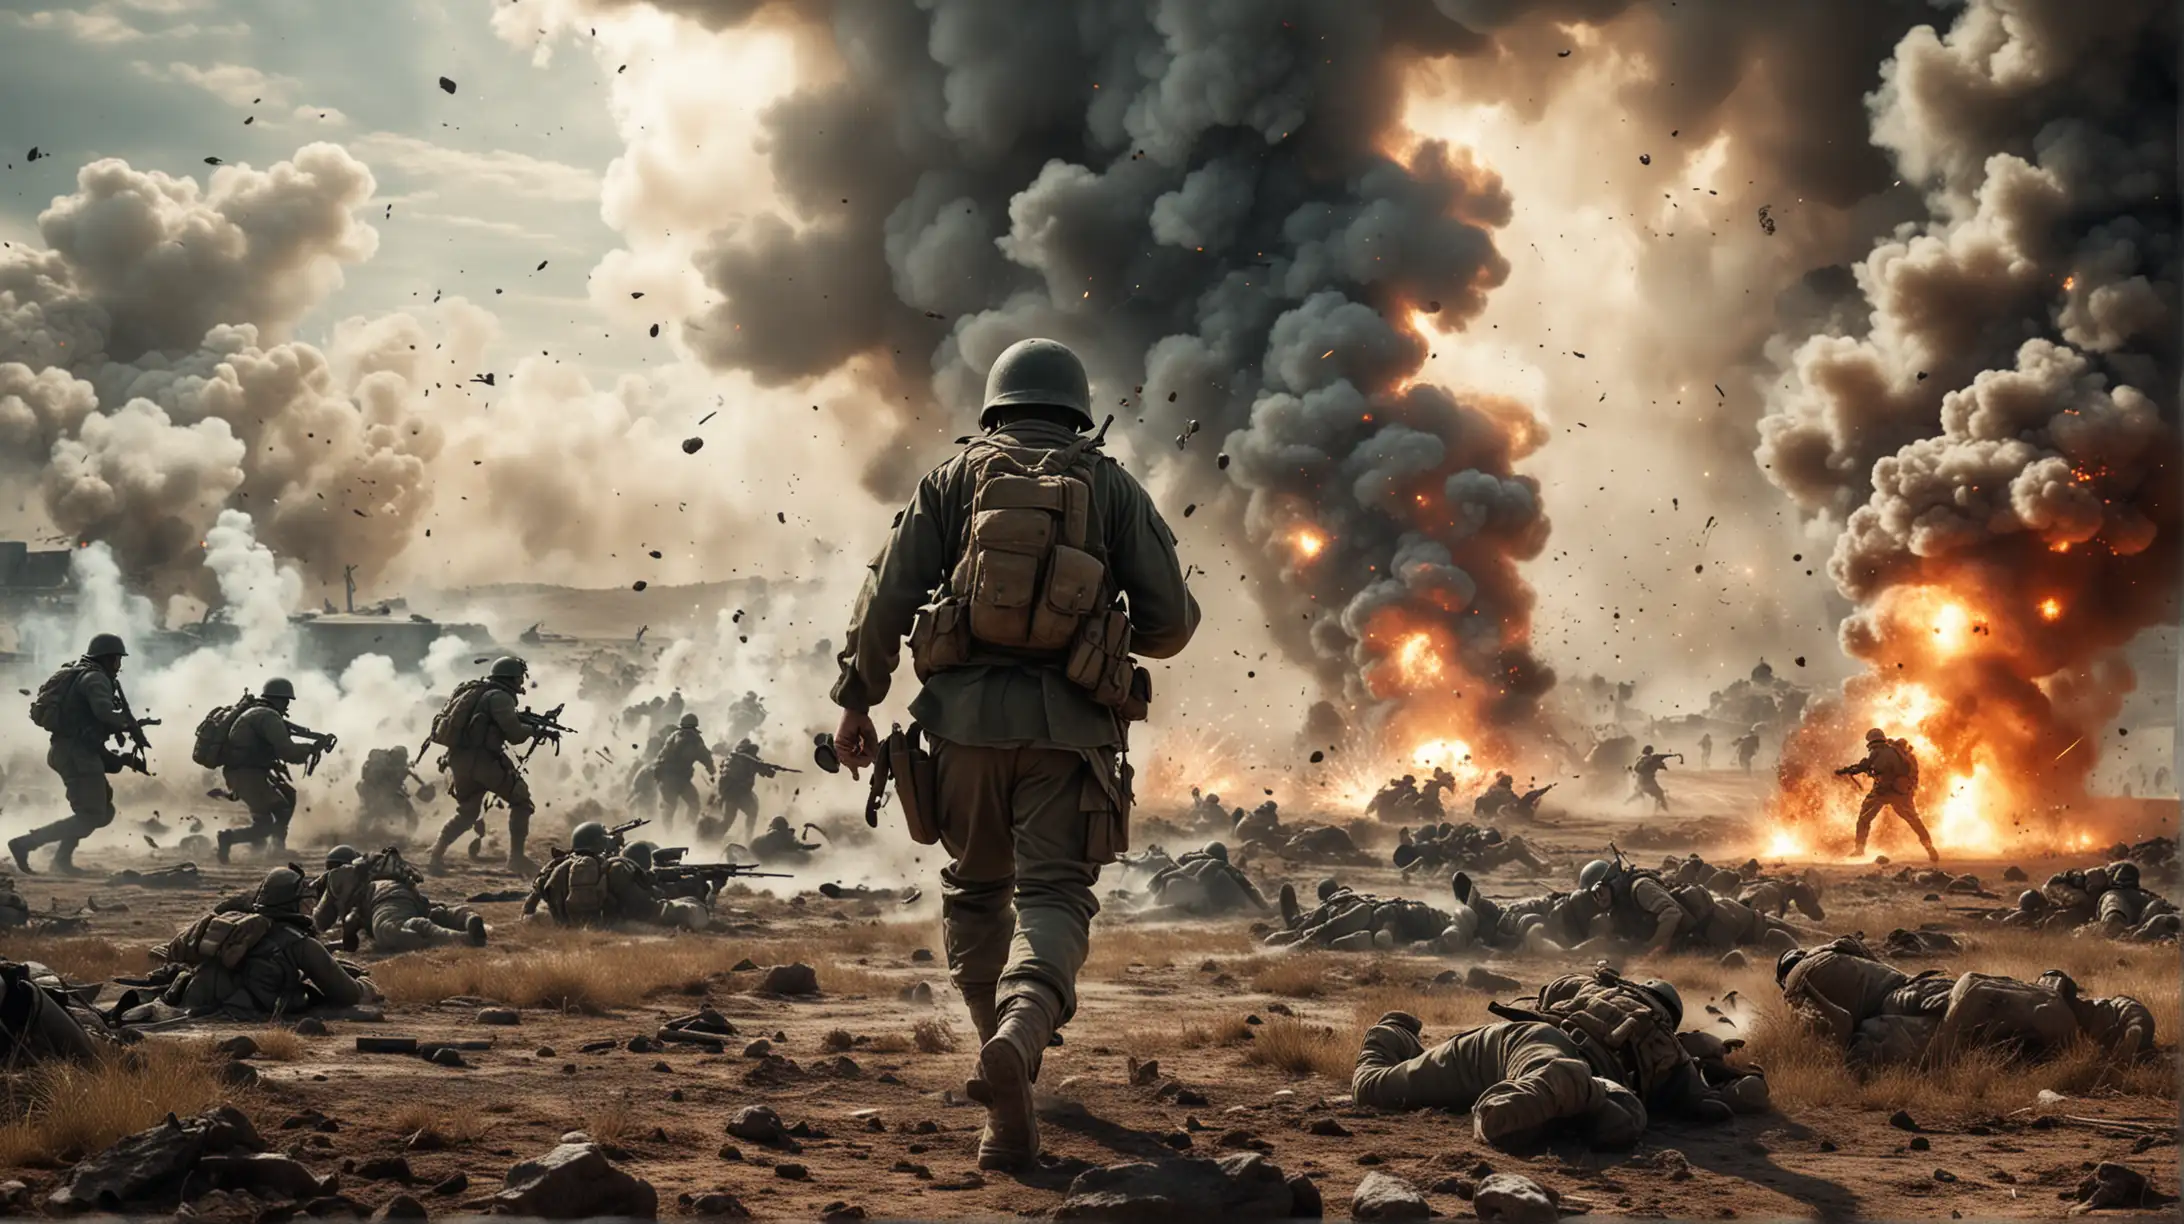 Intense Battlefield Scene with Soldiers Engaged in Combat and Explosions